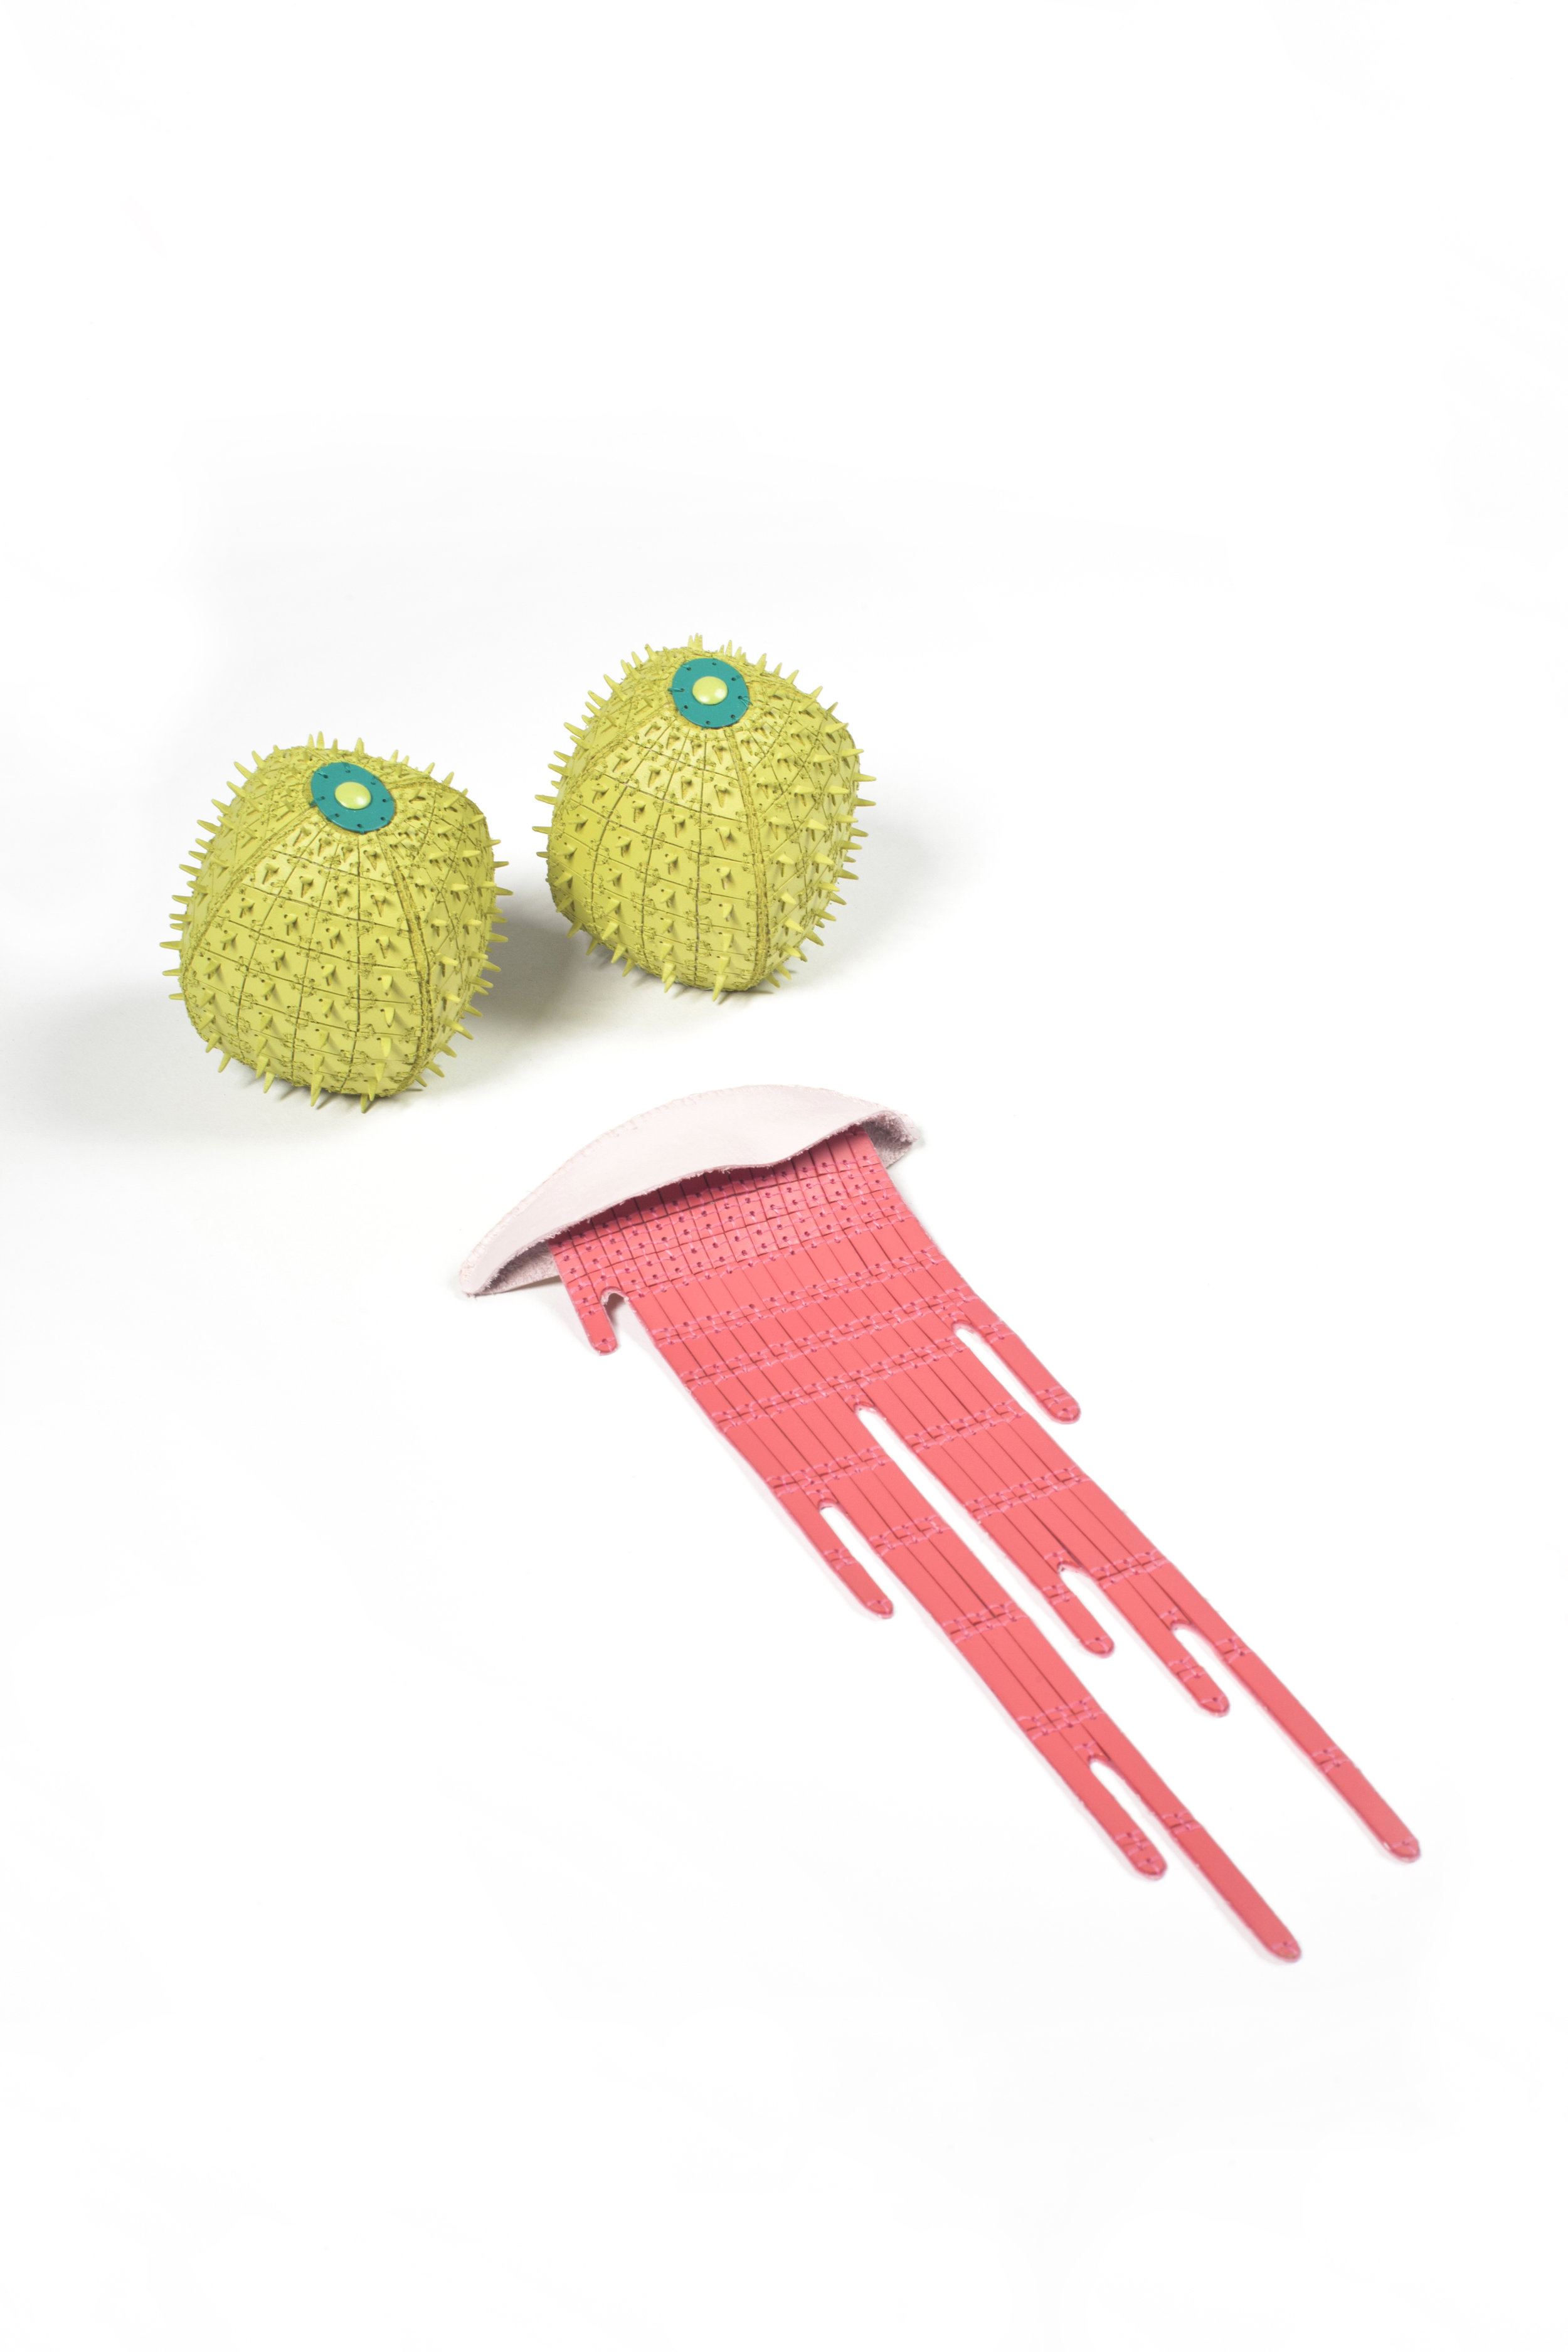   Barrel Cactus Brooch Pair   Brass, Steel, Spray-Paint, Cotton, Polyester, Thread  4”x4”x5”  2013     Weeping Sore Brooch   Brass, Nickel, Spray-Paint, Leather, Cotton, Thread  10”x4”x1”  2013    Photo by Harry Gould Harvey 